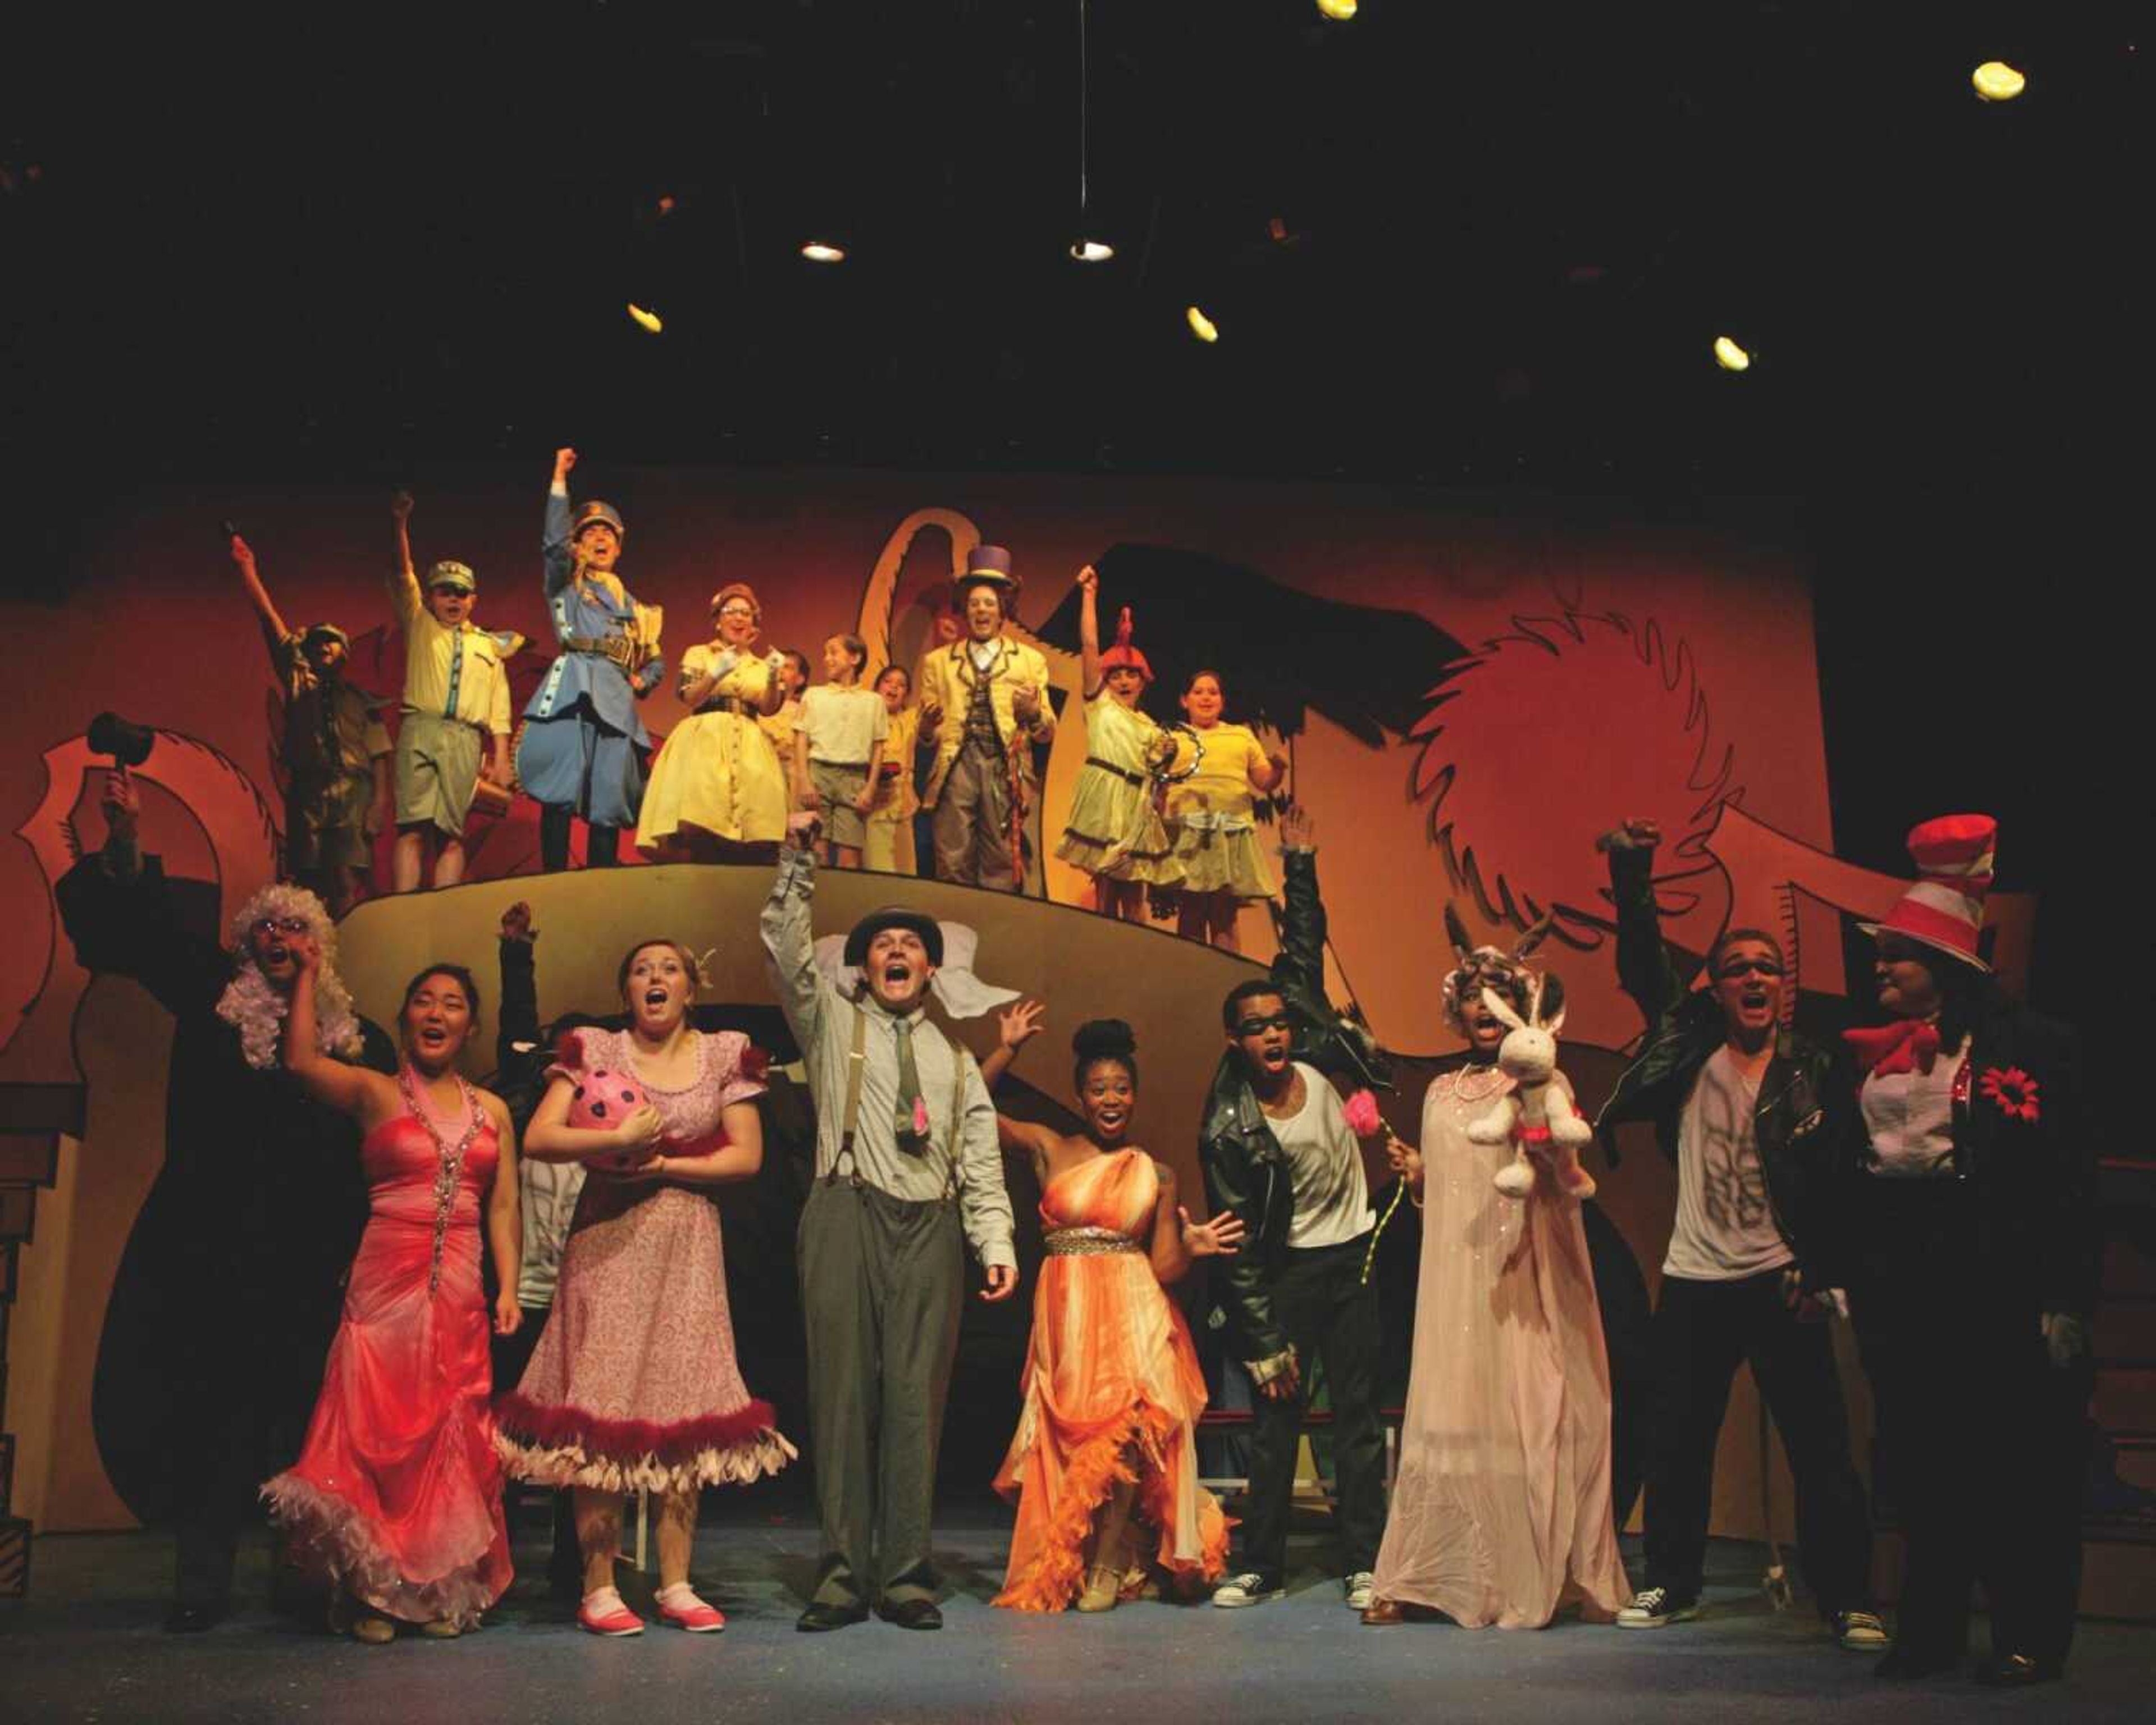 "Seussical the Musical" sold out for all 10 performances during the Summer Arts Festival.